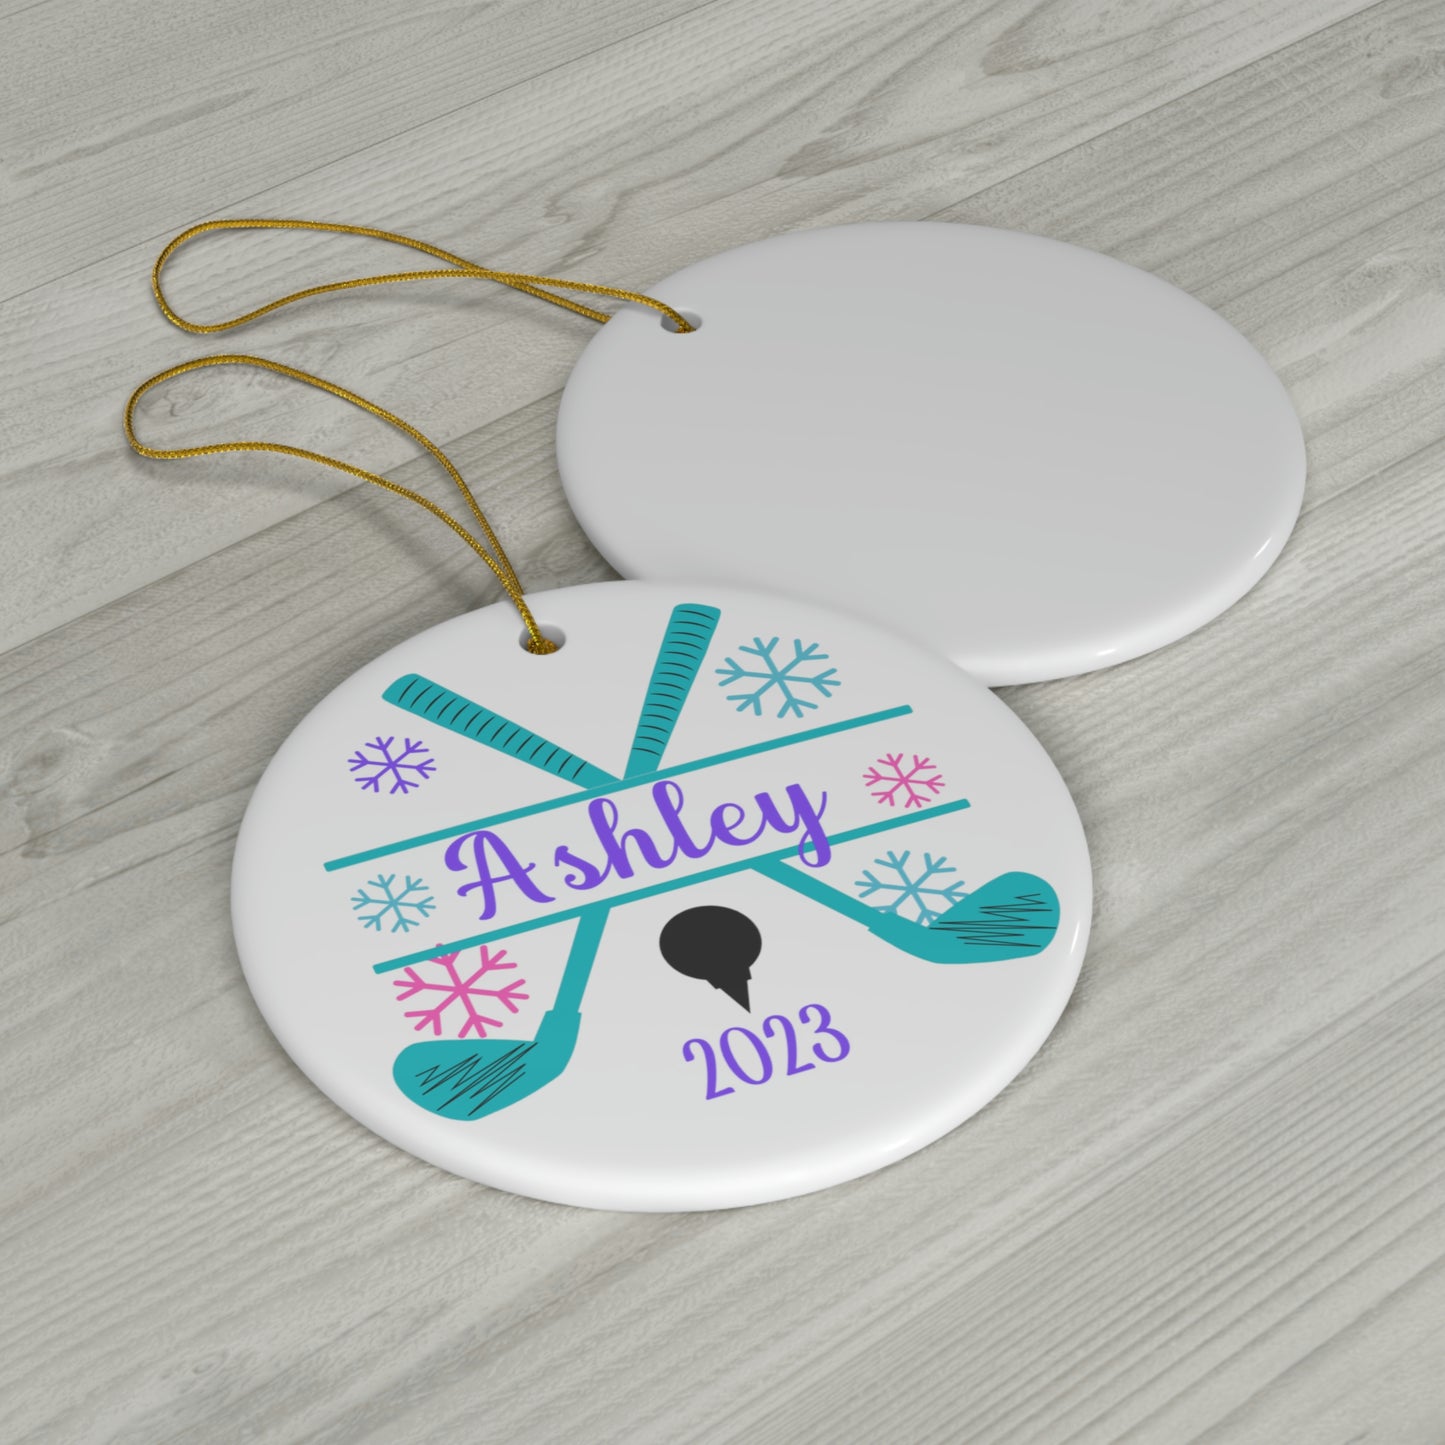 Girls Golf Ornament, Personalized Christmas Ceramic Golf Christmas Tree Ornament for Golfers, 2023 Holiday Ornament